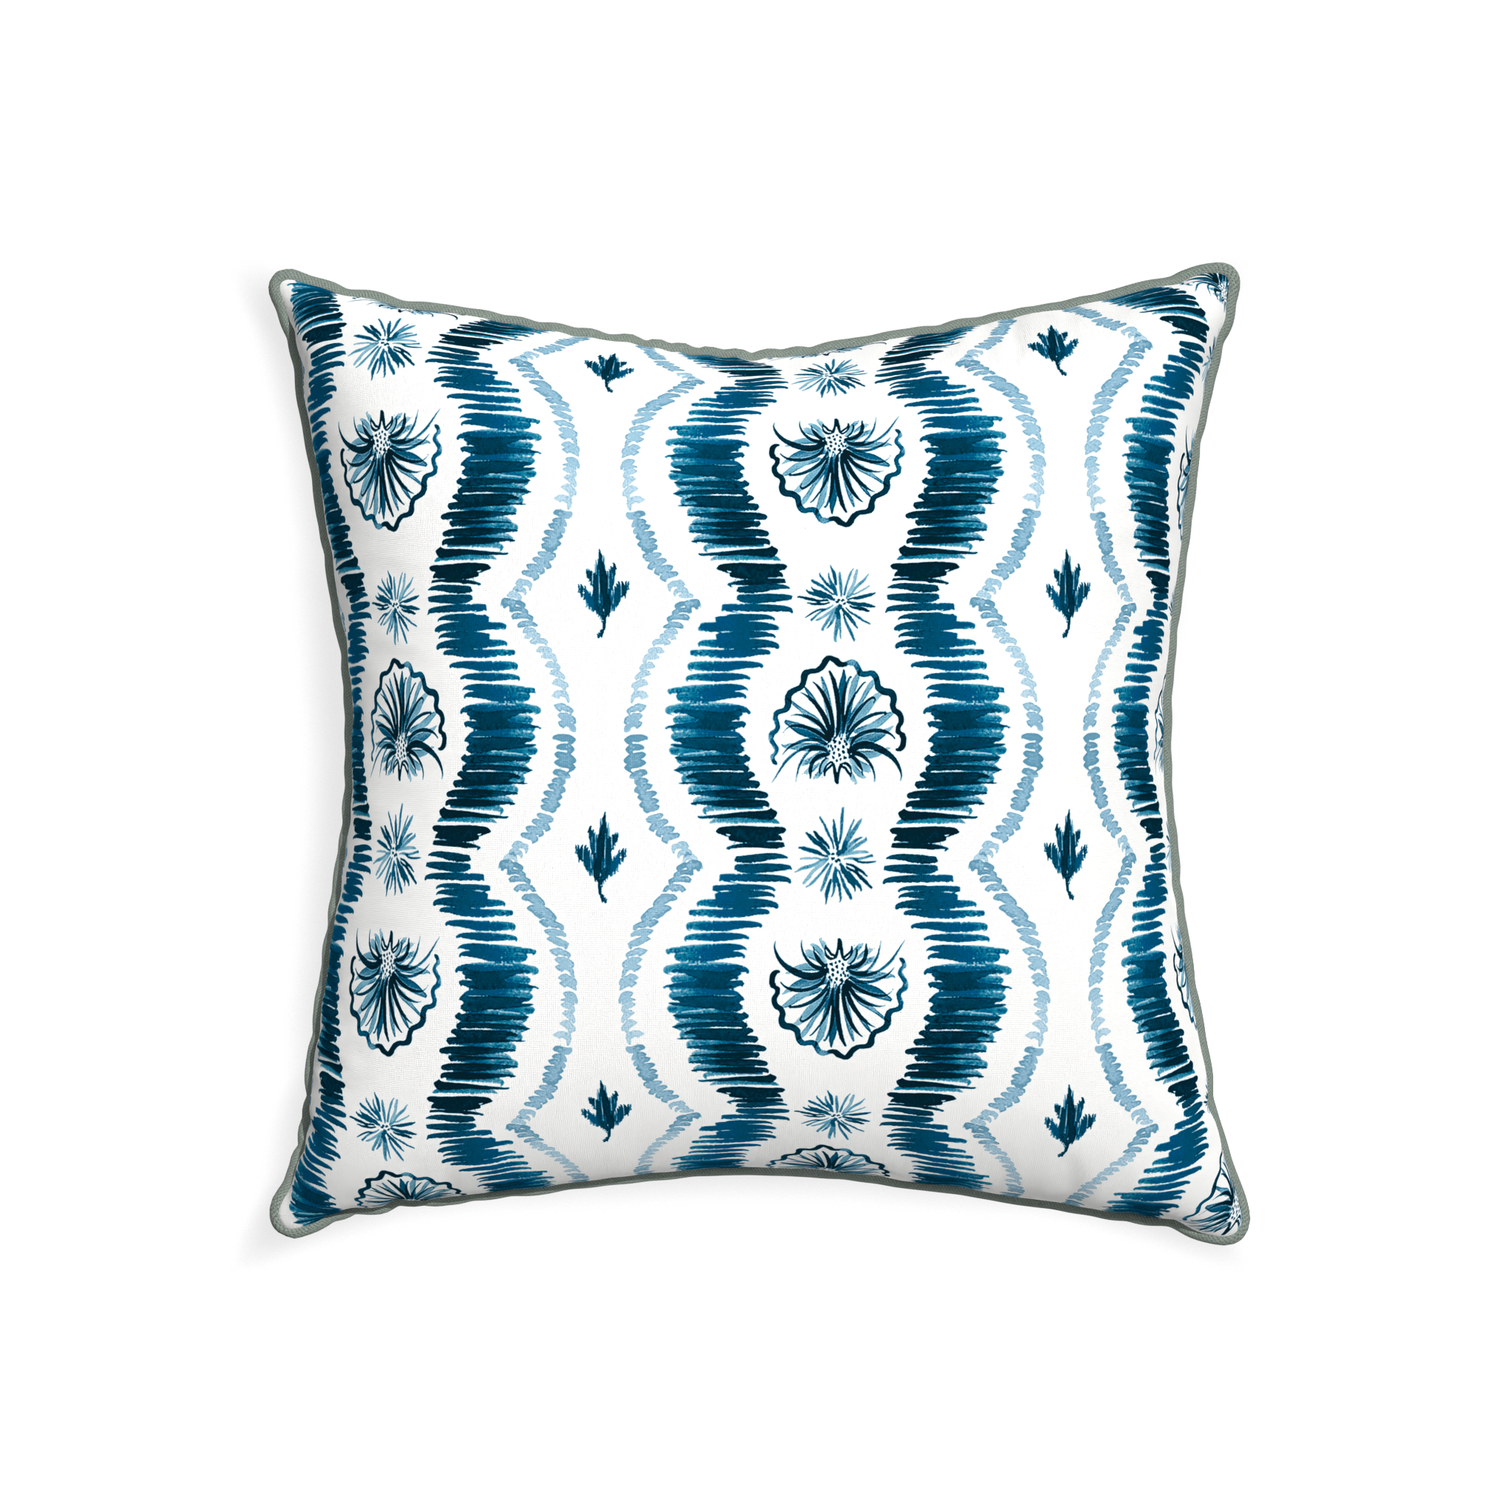 22-square alice custom blue ikatpillow with sage piping on white background